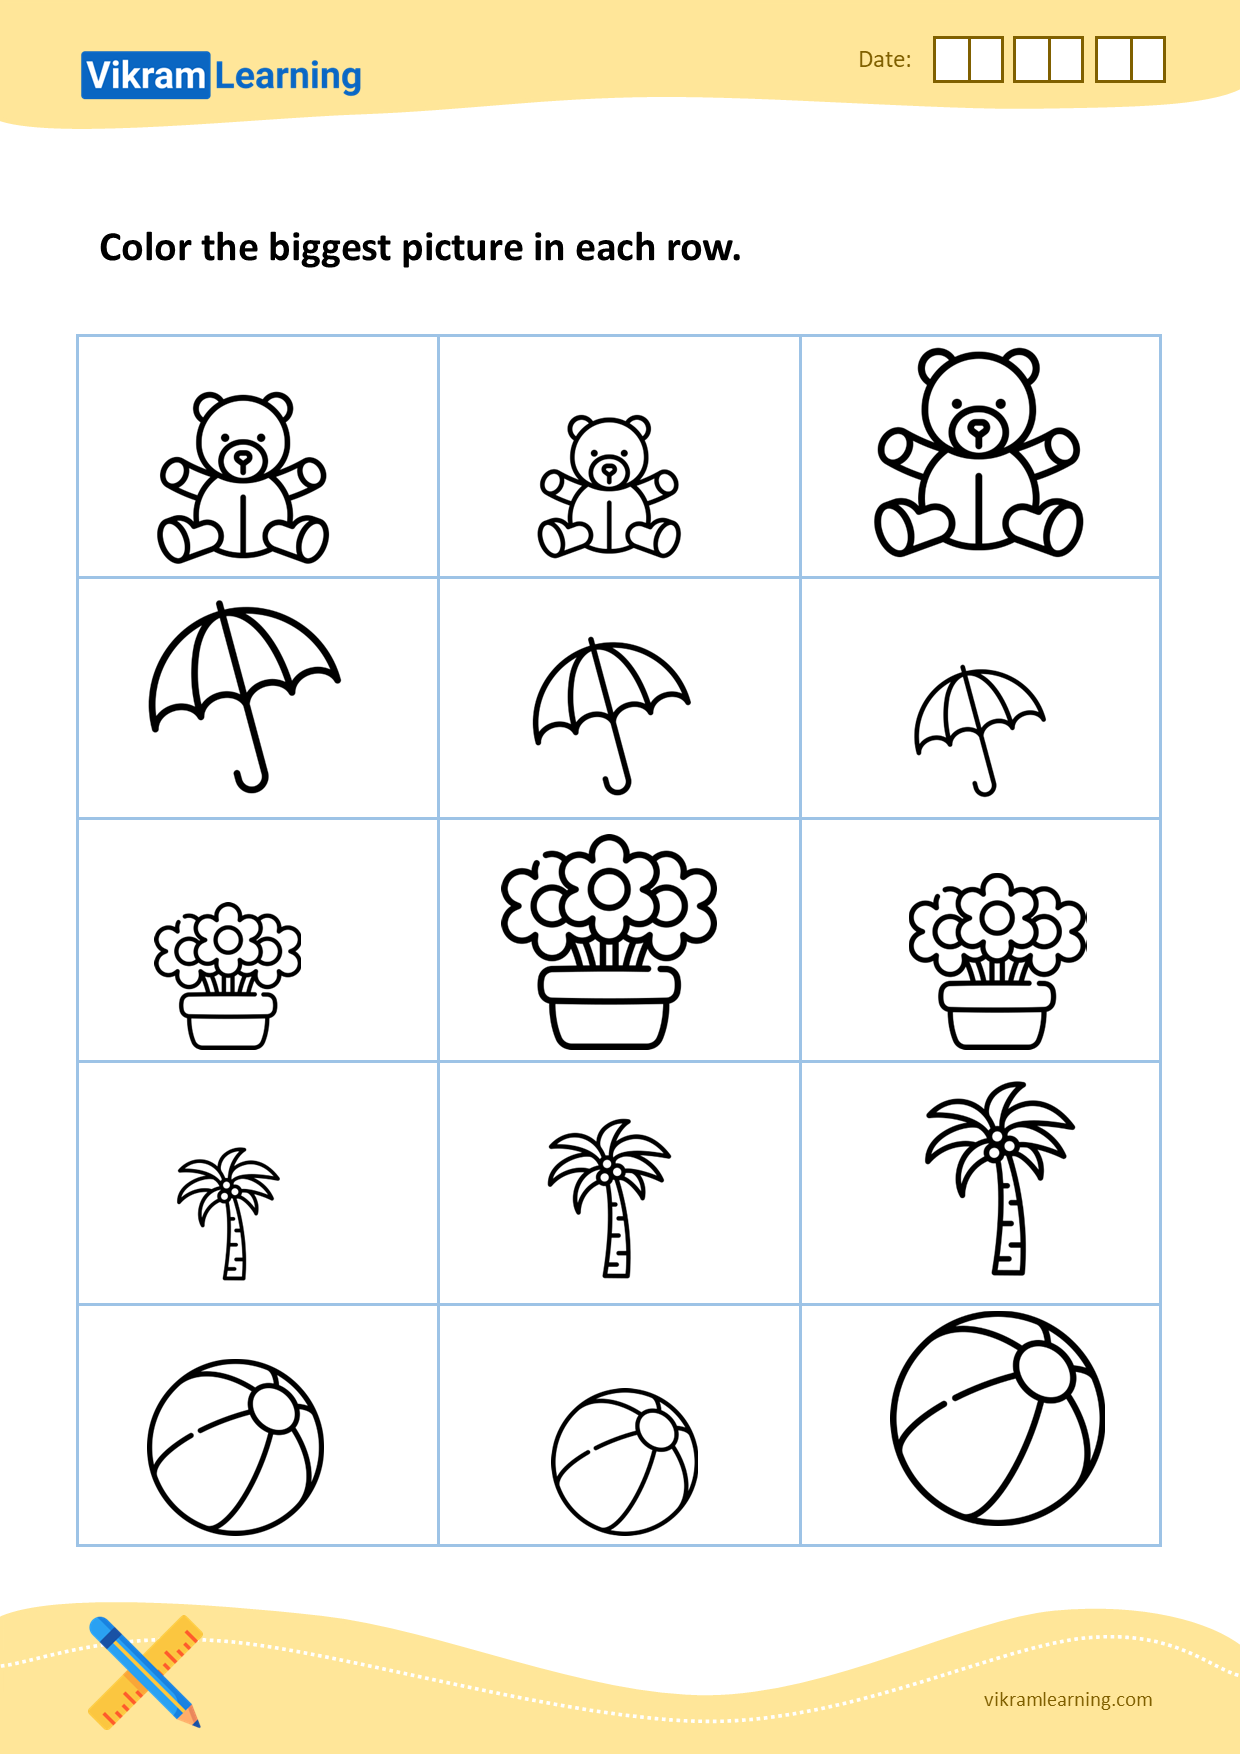 Download color the biggest picture an each row worksheets